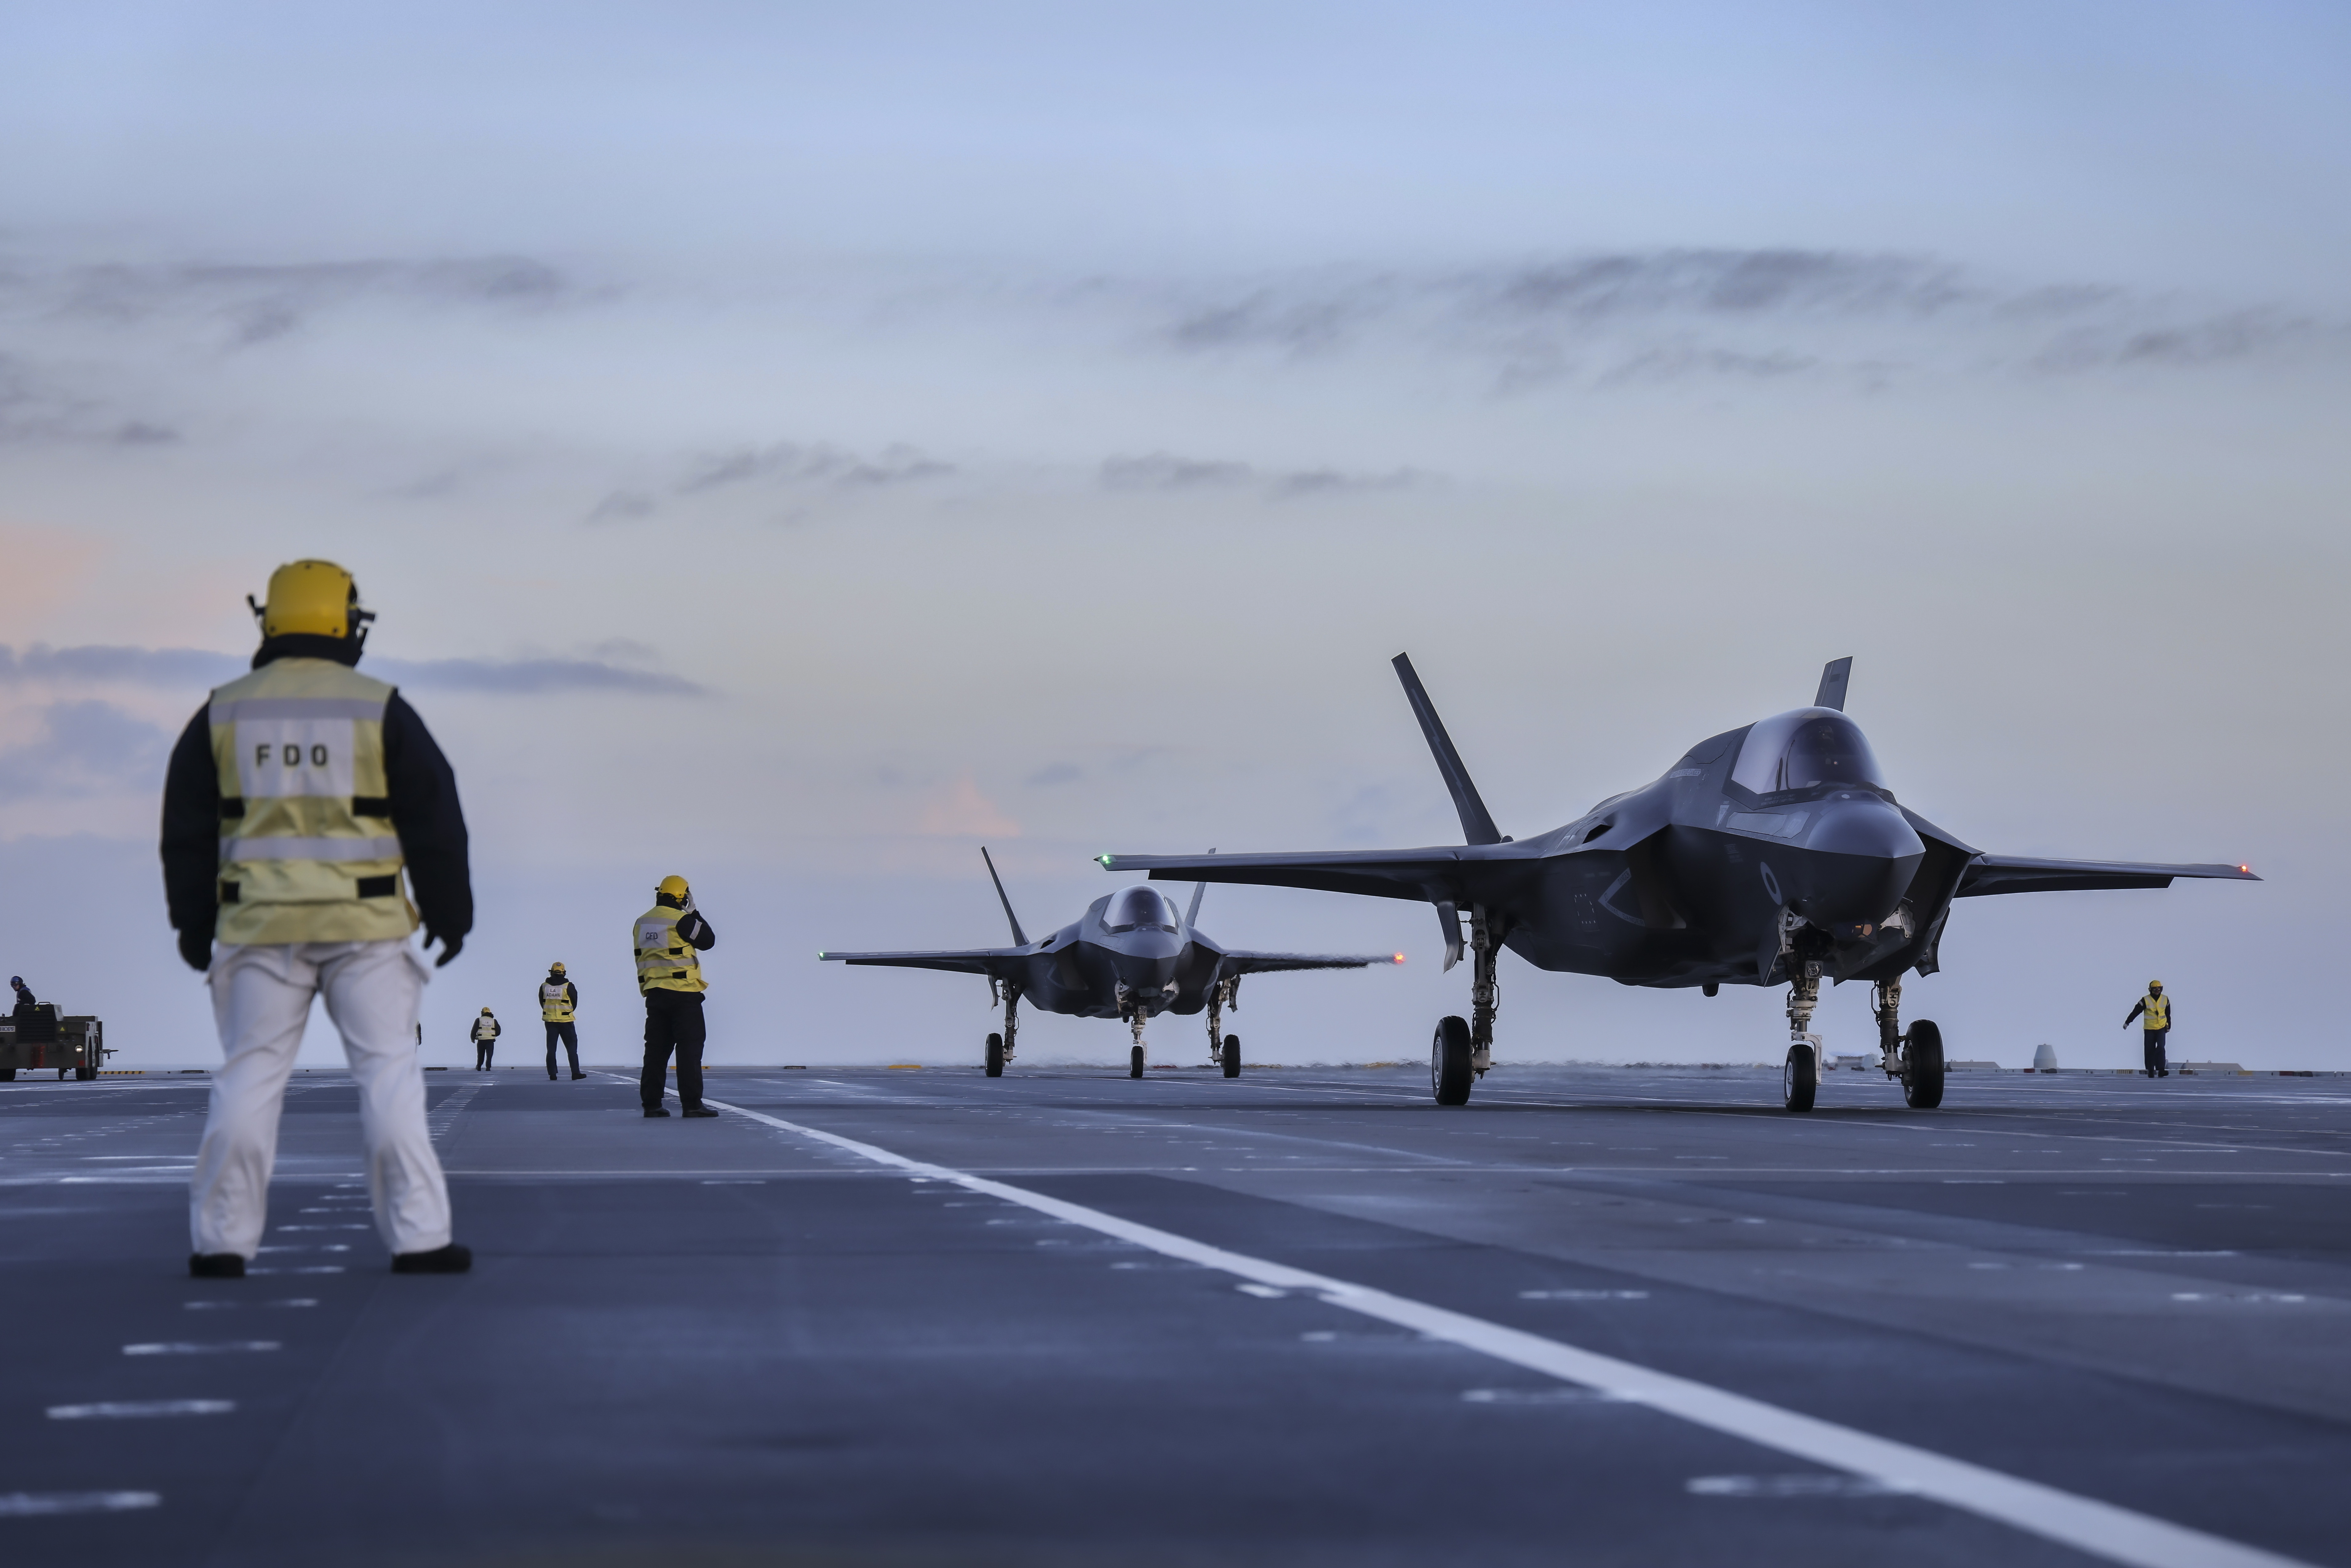 Image shows personnel and RAF Typhoons on the deck of aircraft carrier.